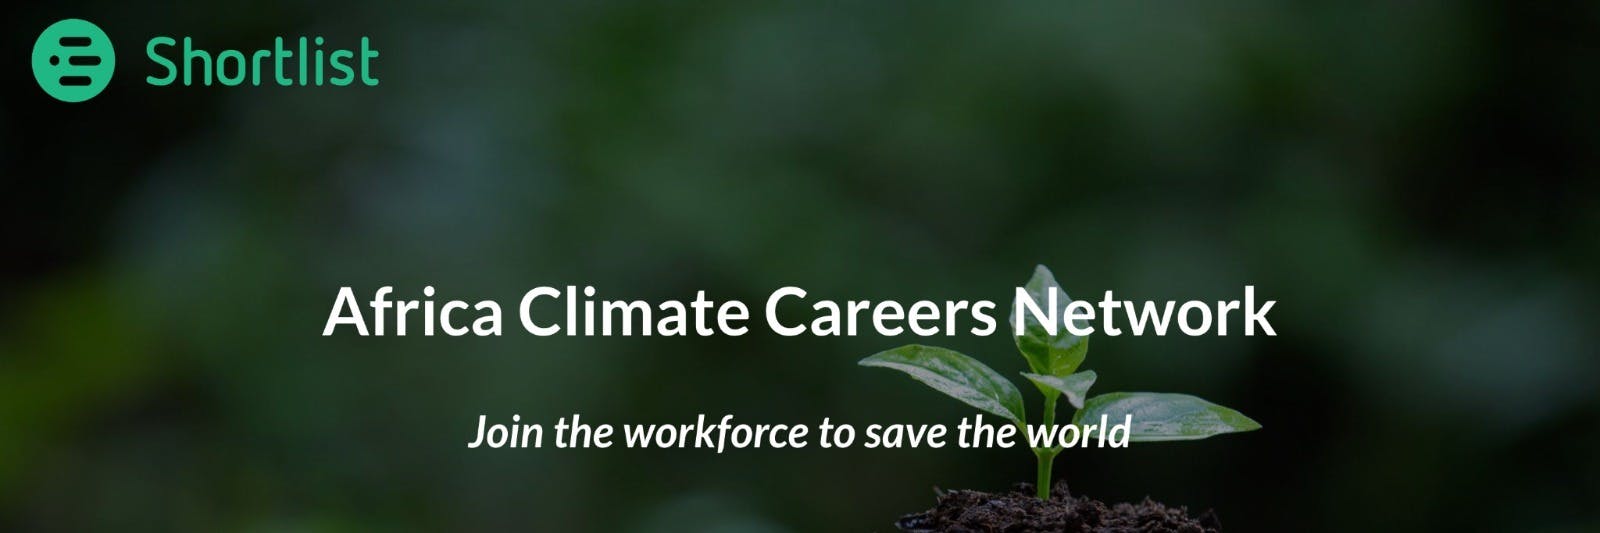 Africa Climate Careers Network